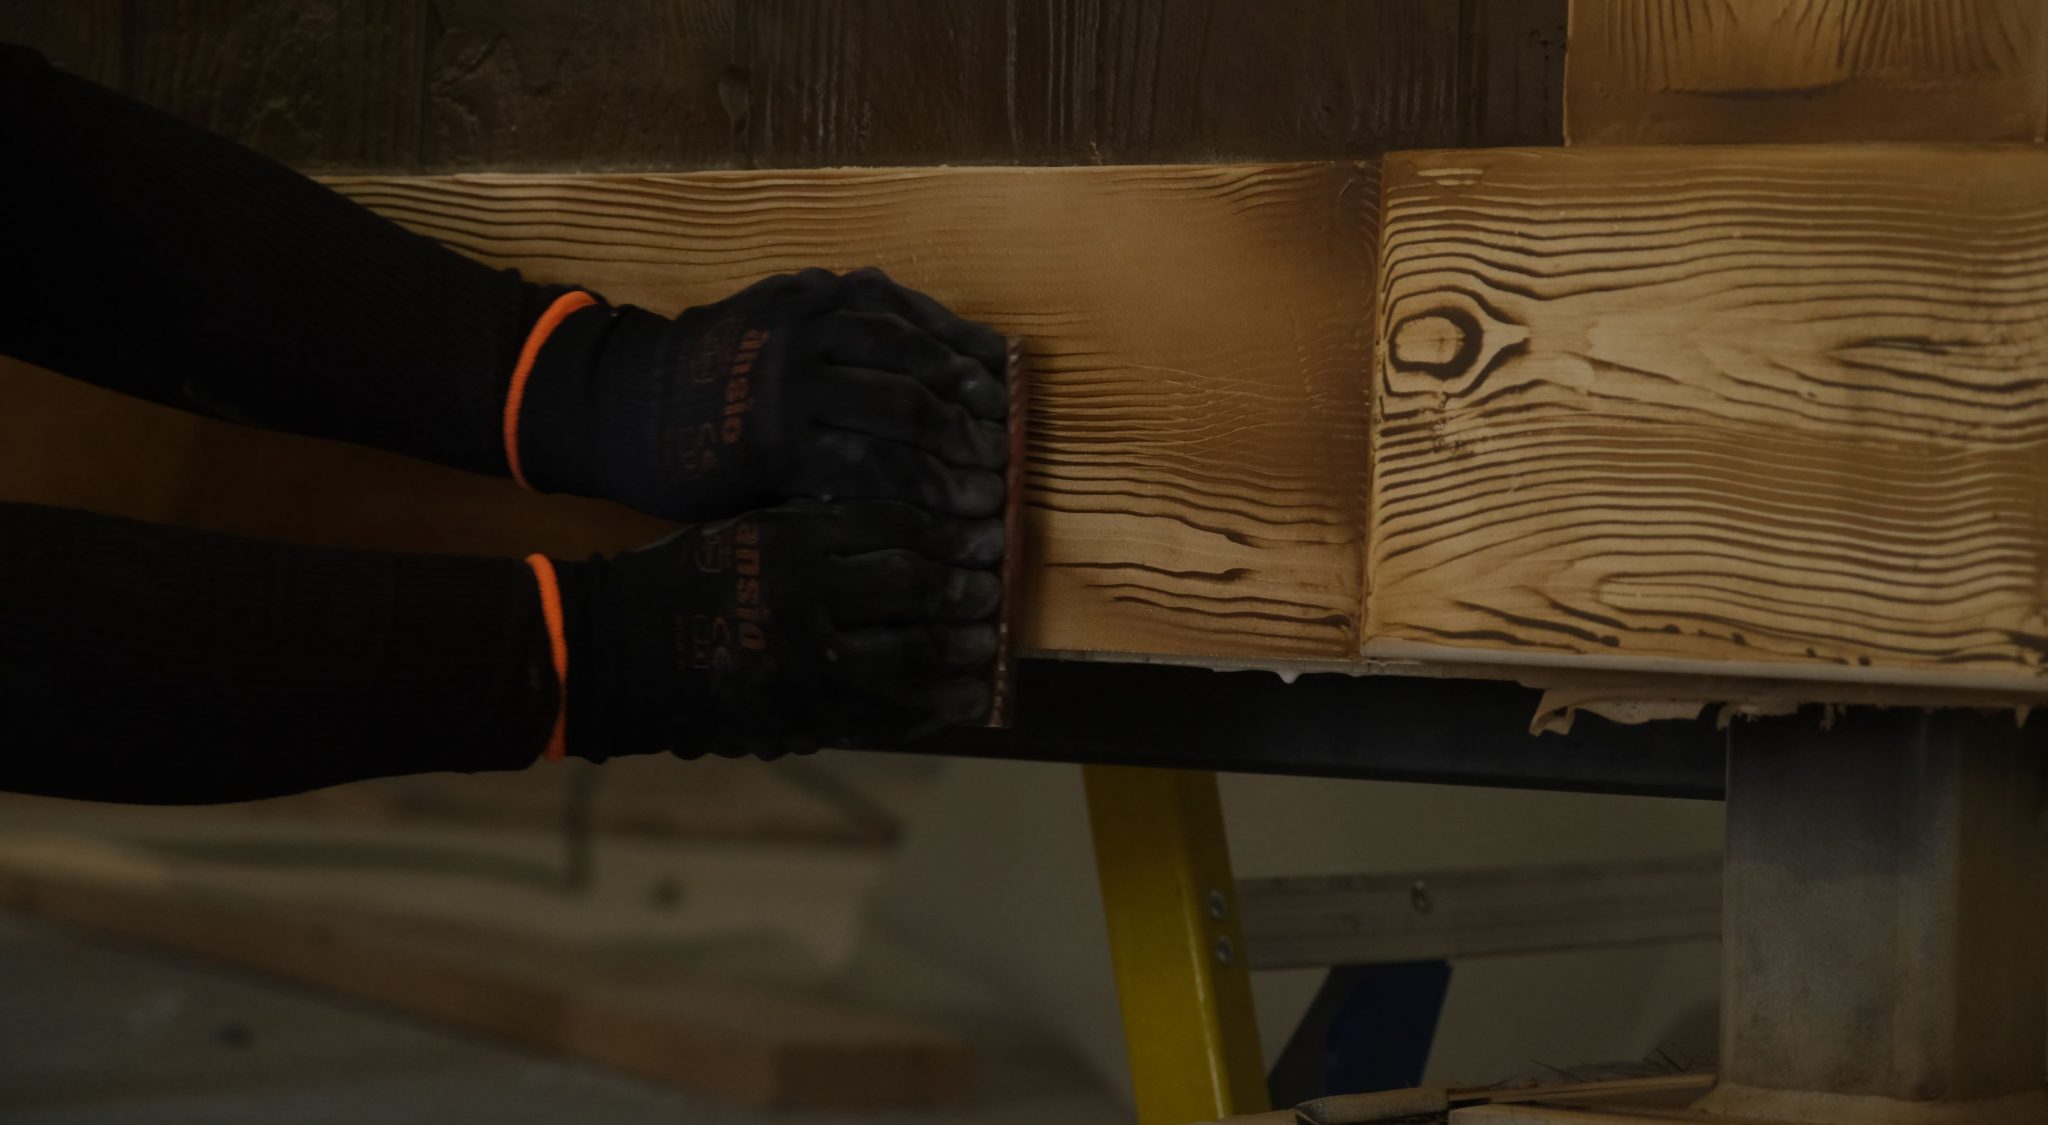 A close-up of a person decorating wood, with traditional wood like markings